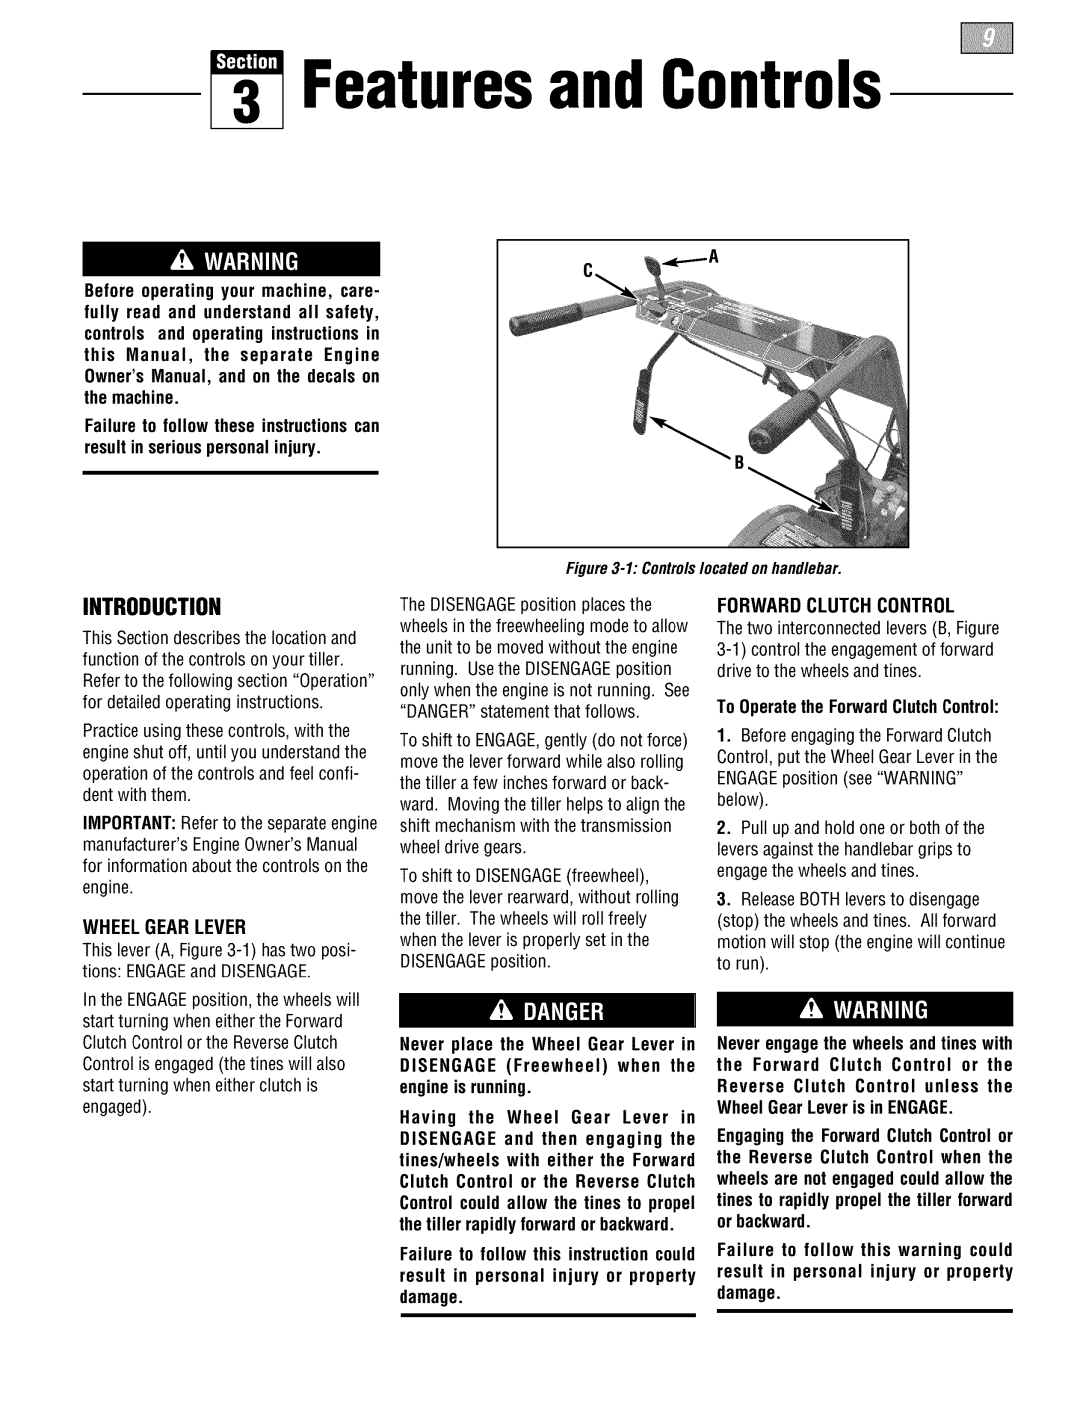 Troy-Bilt E666MM Wheel Gear Lever, Failure to follow this instruction could, result in personal injury or property damage 